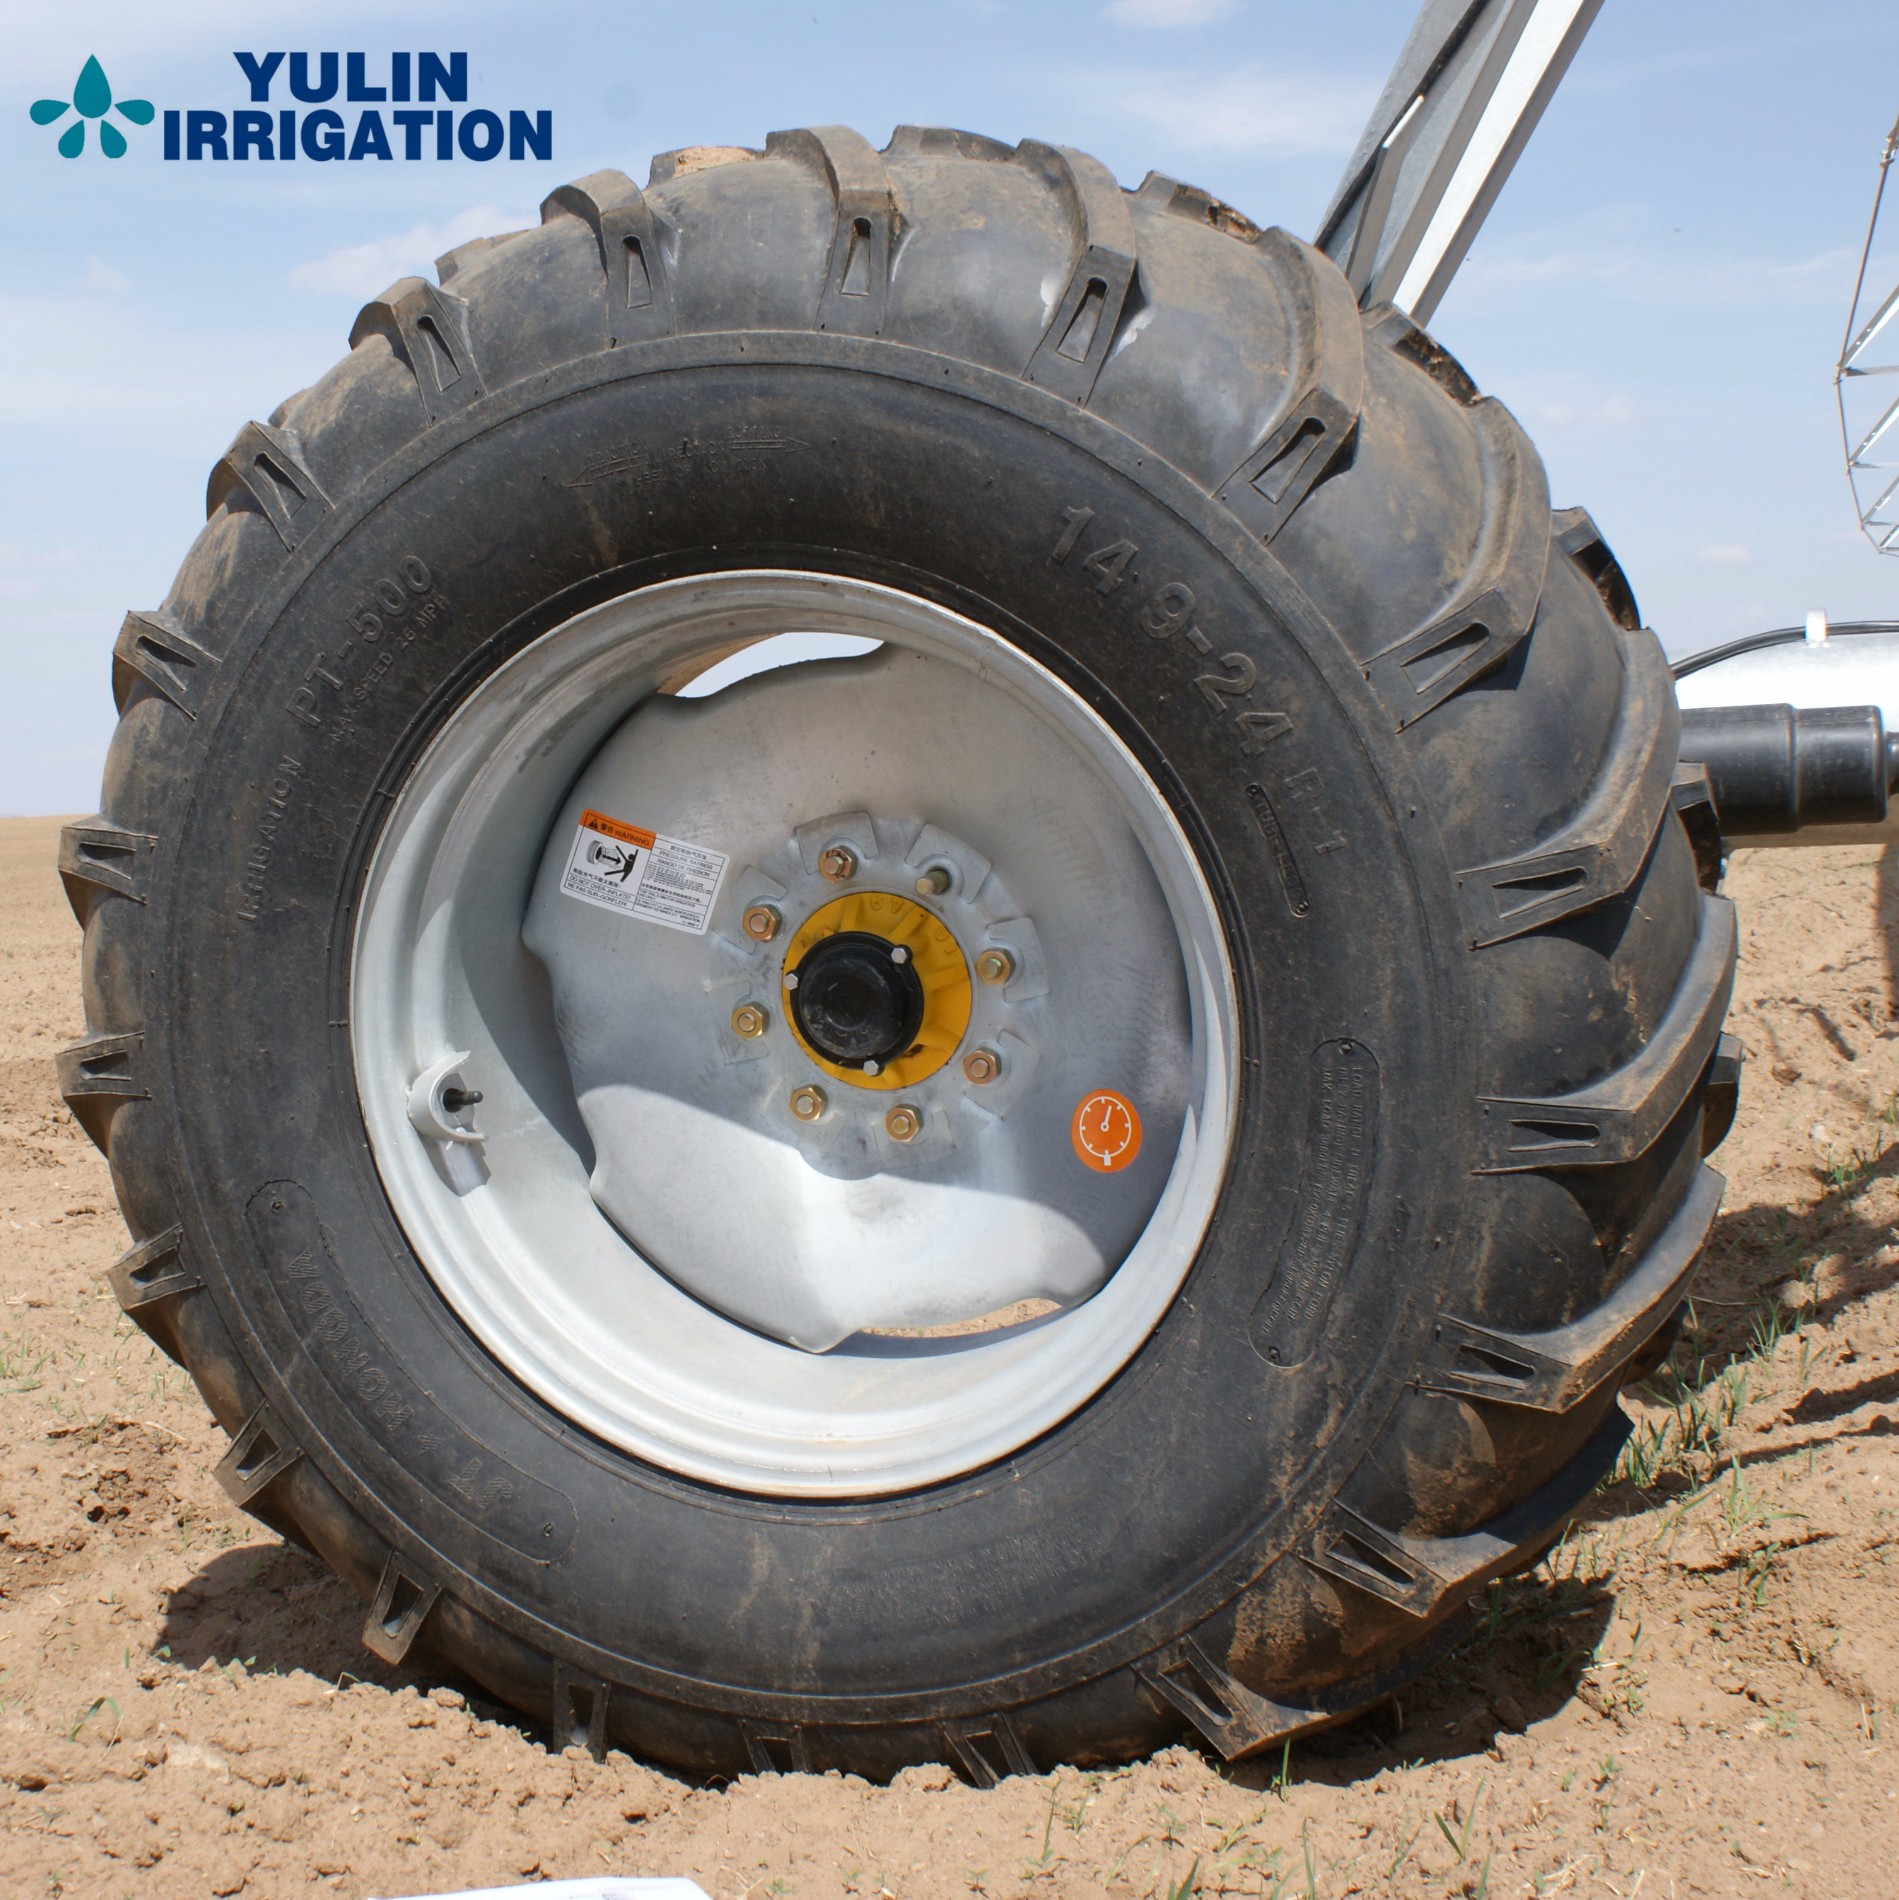 Chinese Suppliers 14.9-24 Vacuum Tire Manufacturers, Chinese Suppliers 14.9-24 Vacuum Tire Factory, Supply Chinese Suppliers 14.9-24 Vacuum Tire